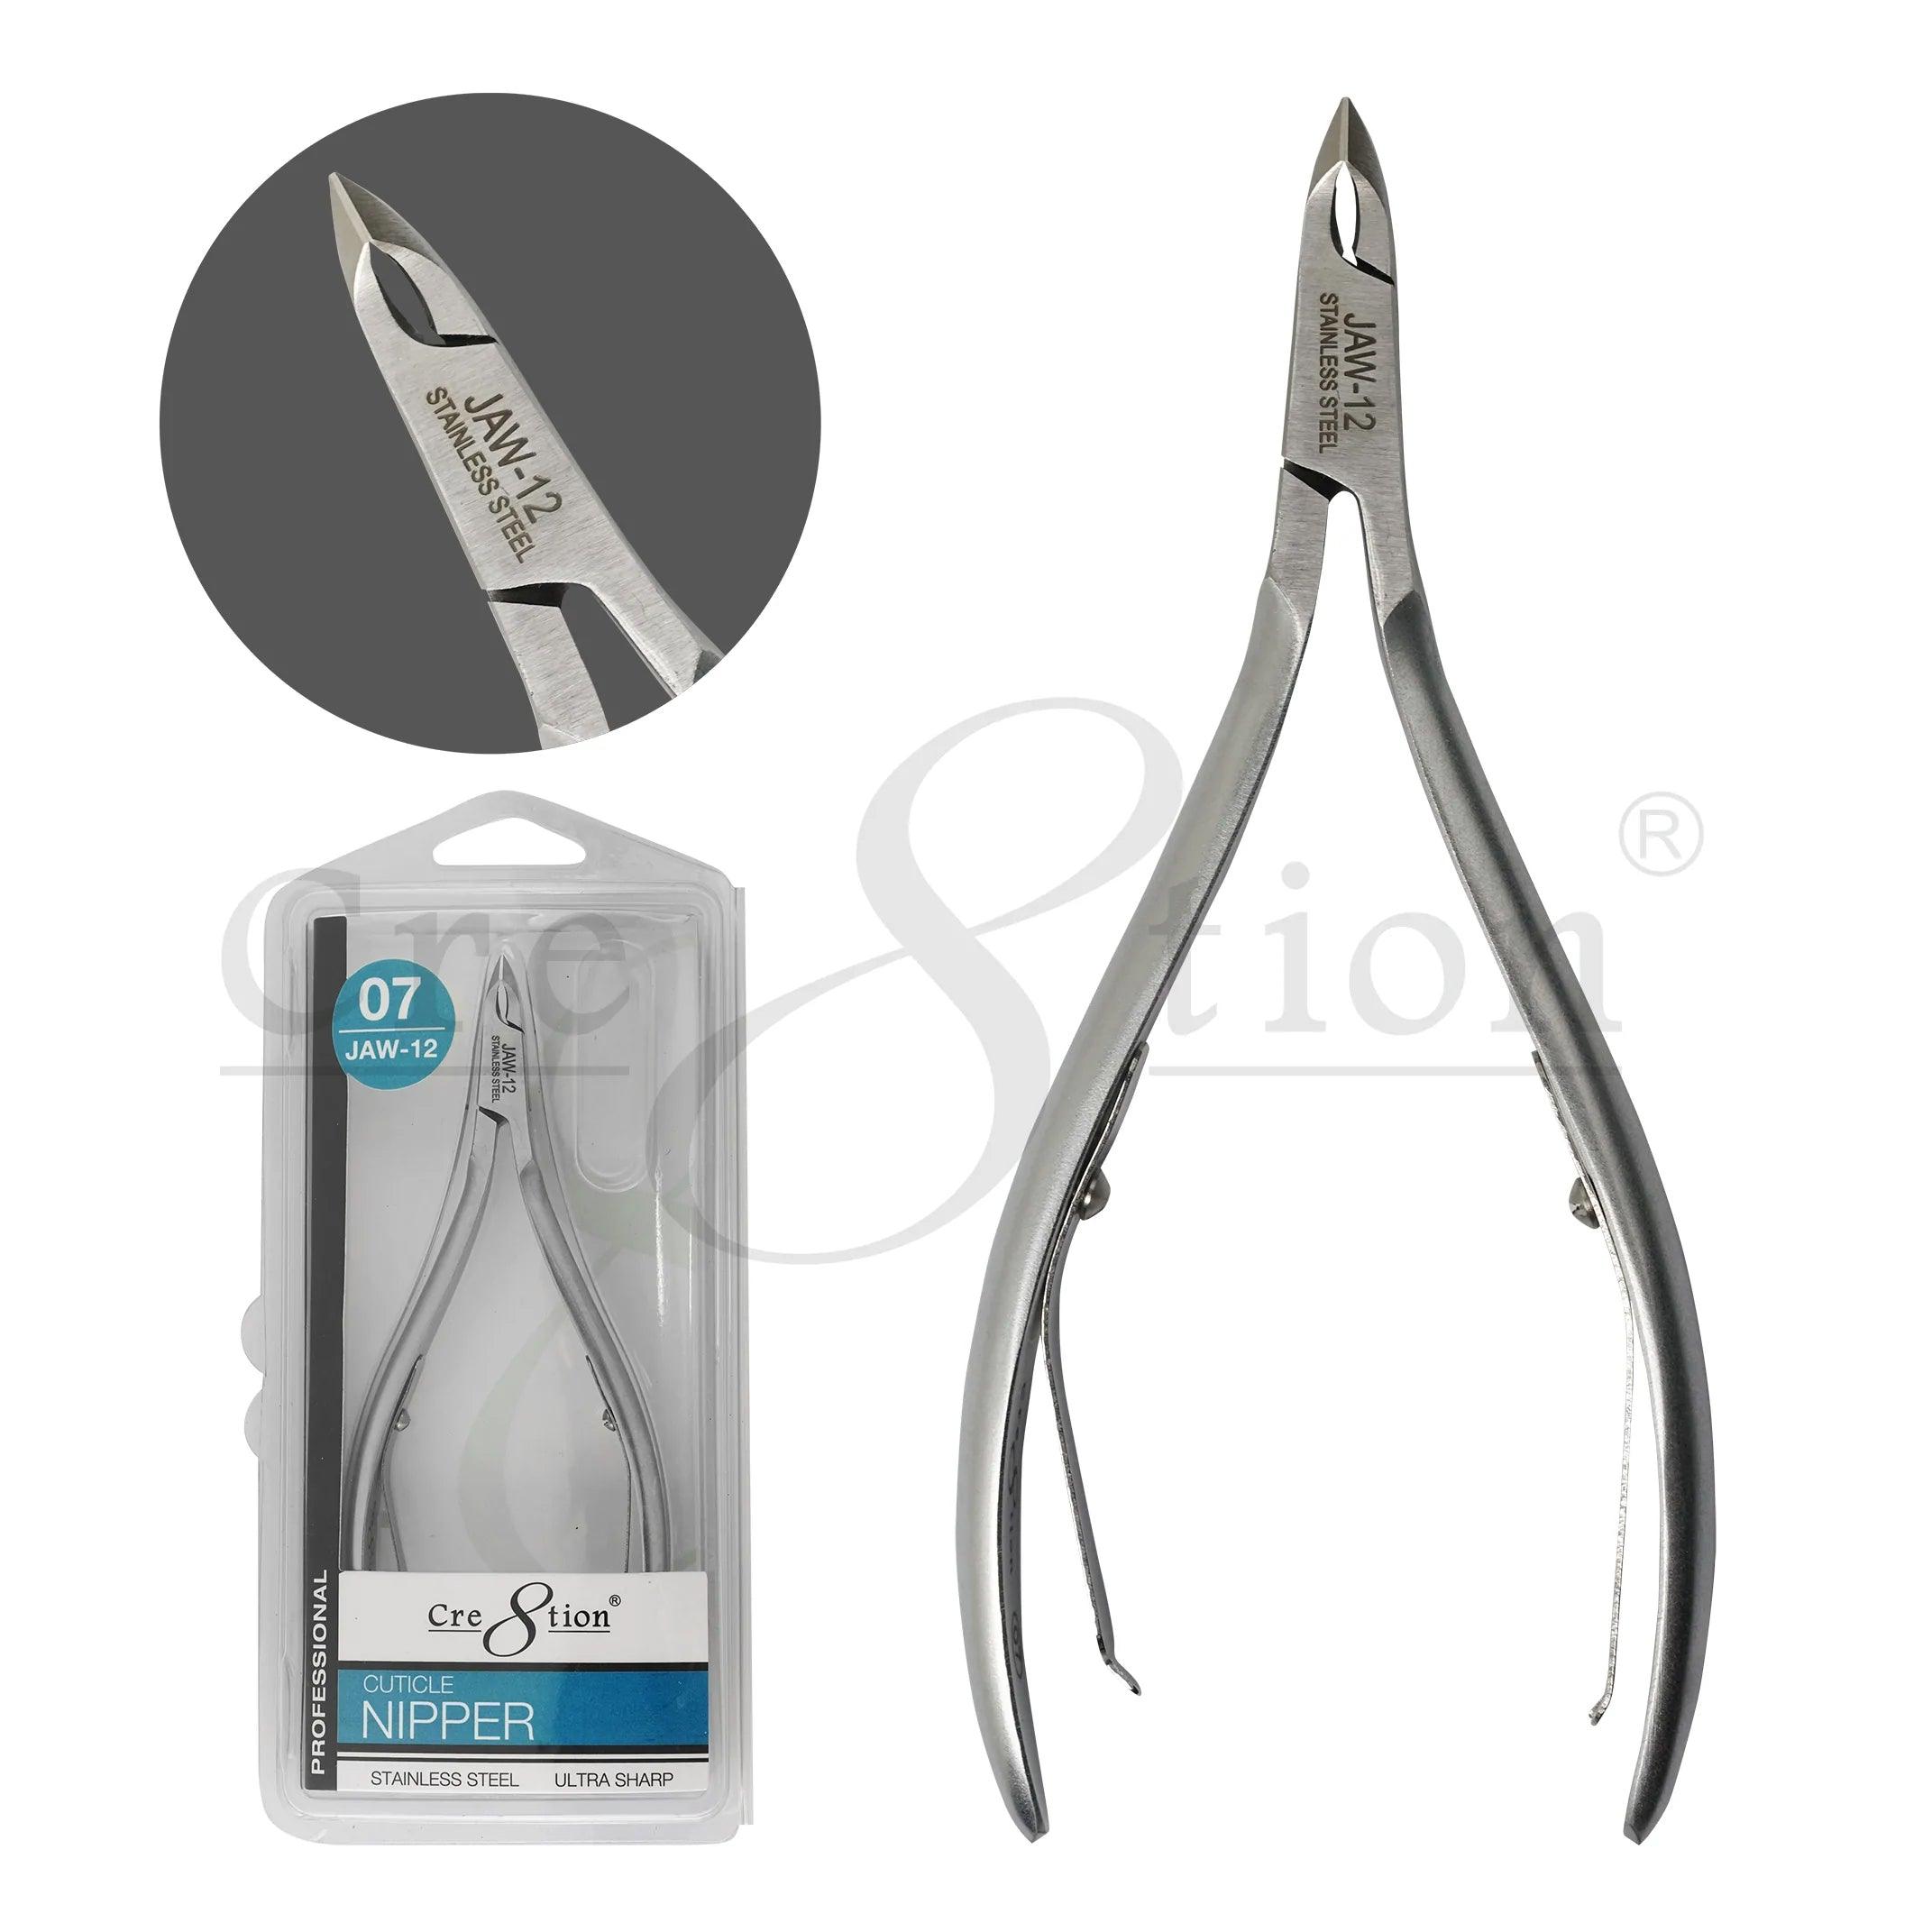 Cre8tion Stainless Steel Cuticle Nipper #07 Jaw 12